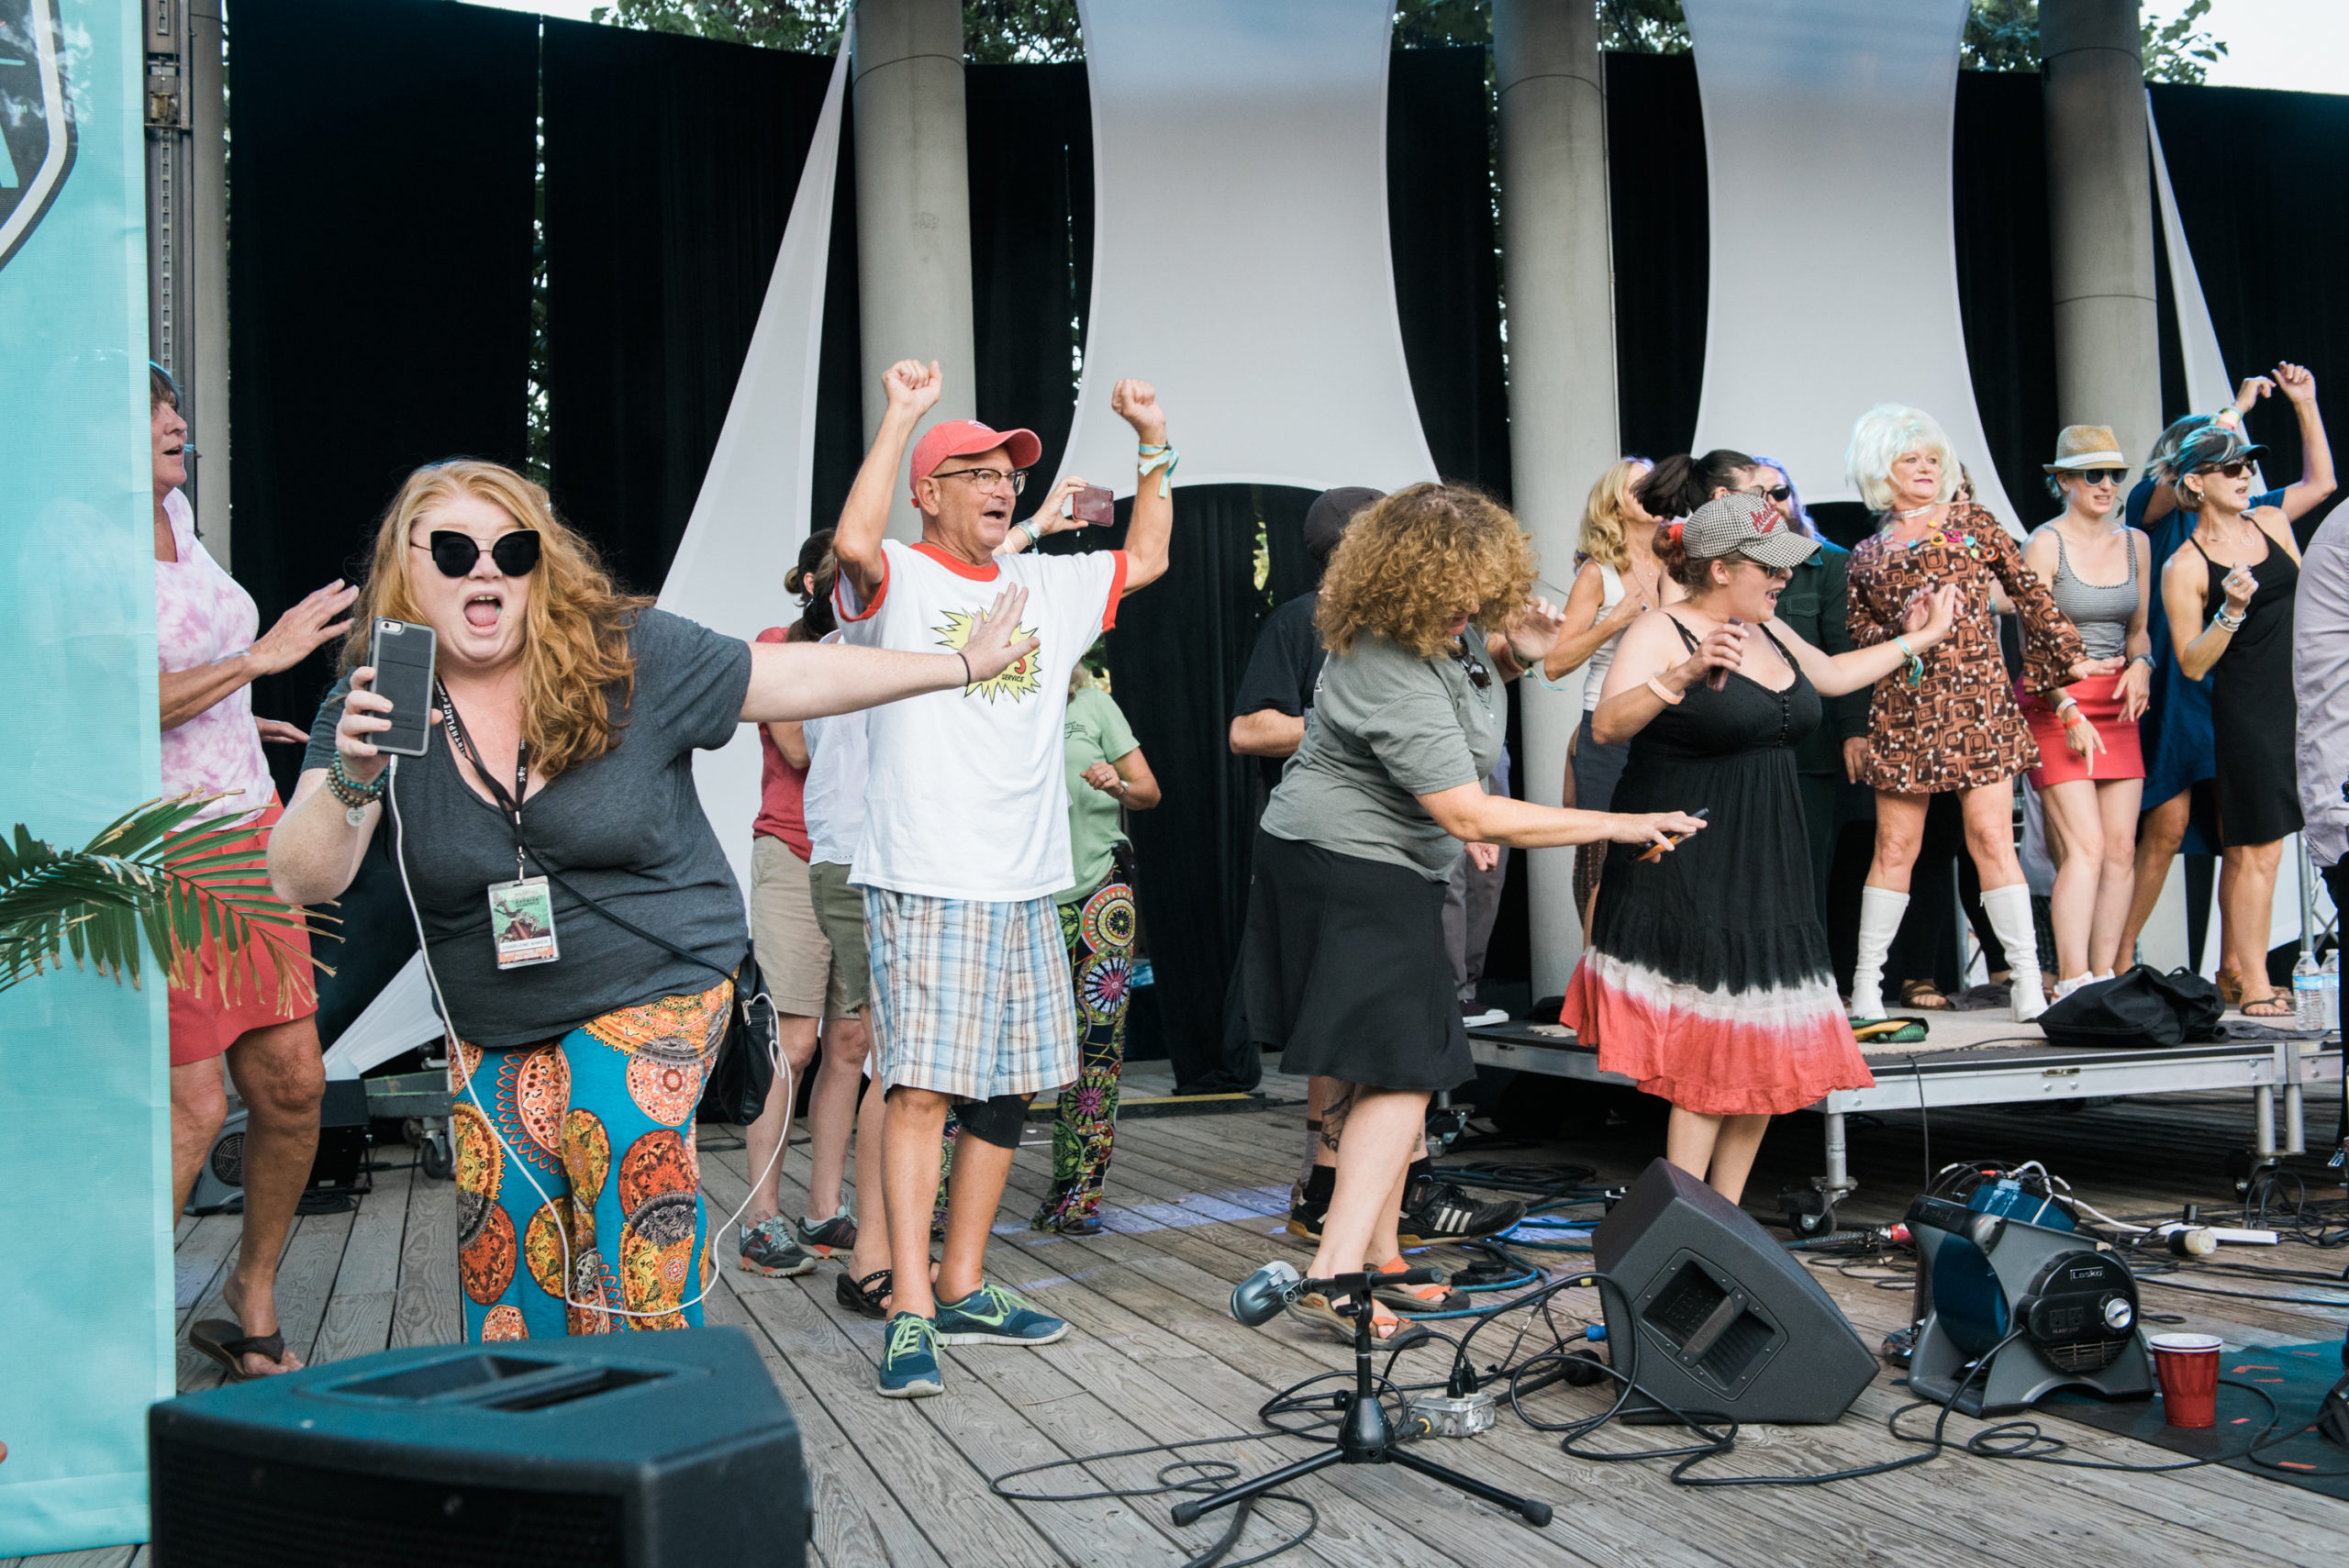 A group of people dancing on stage at Bristol Rhythm & Roots Reunion with the band, including the blog author.
